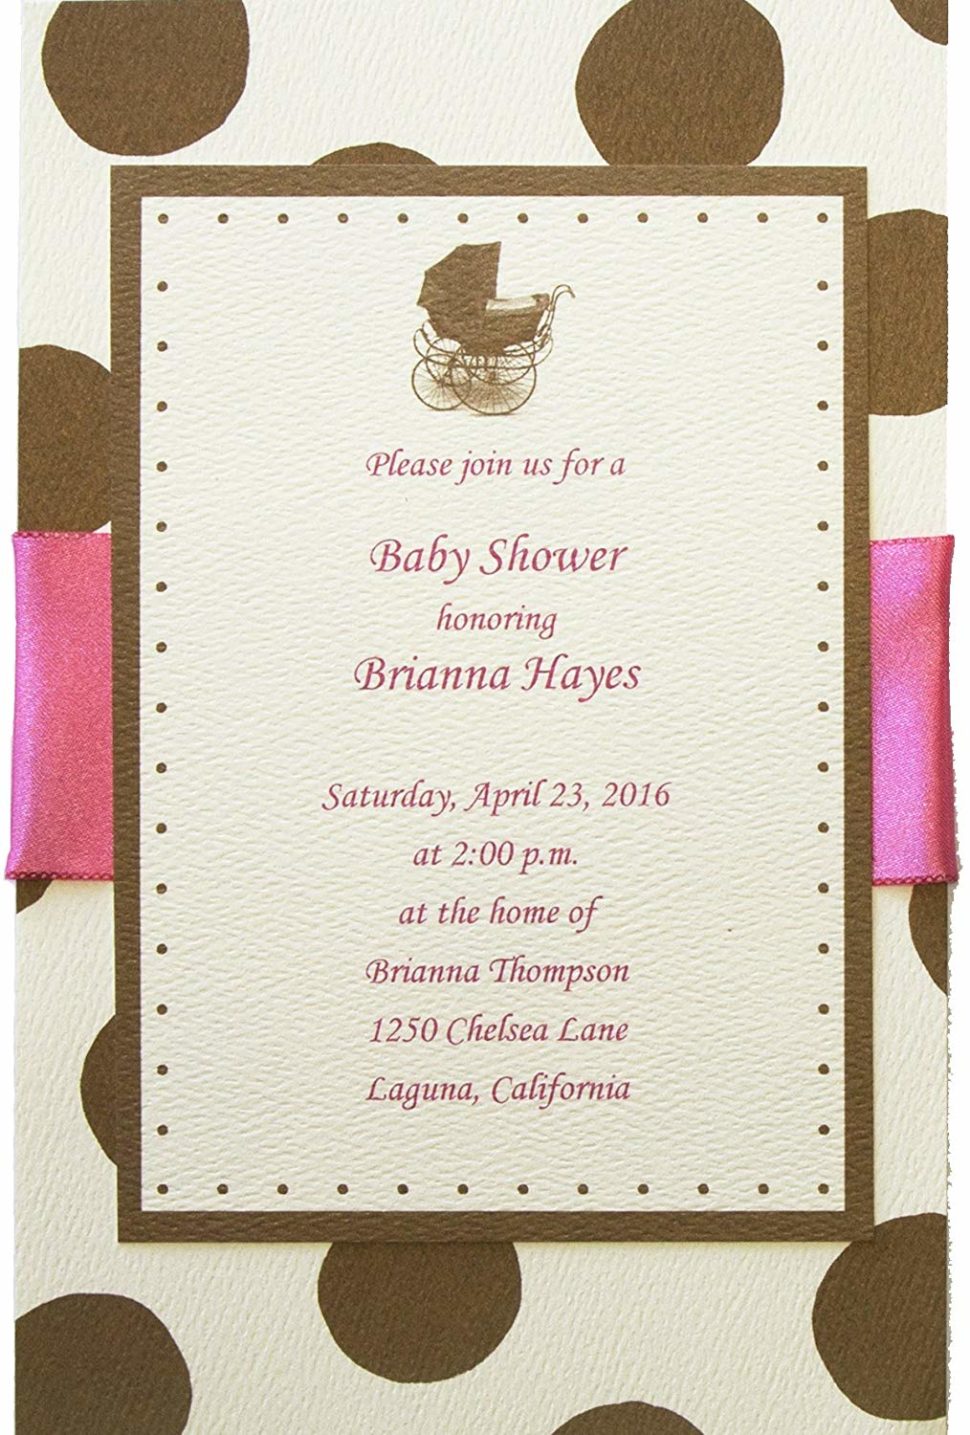 Medium Size of Baby Shower:63+ Delightful Cheap Baby Shower Invitations Image Inspirations Amazoncom Baby Shower Invitations Baby Shower Invitations Amazoncom Baby Shower Invitations Baby Shower Invitations Boy Or Twins Baby Shower Invitations Printable Diy Baby Shower Invitations 10 In